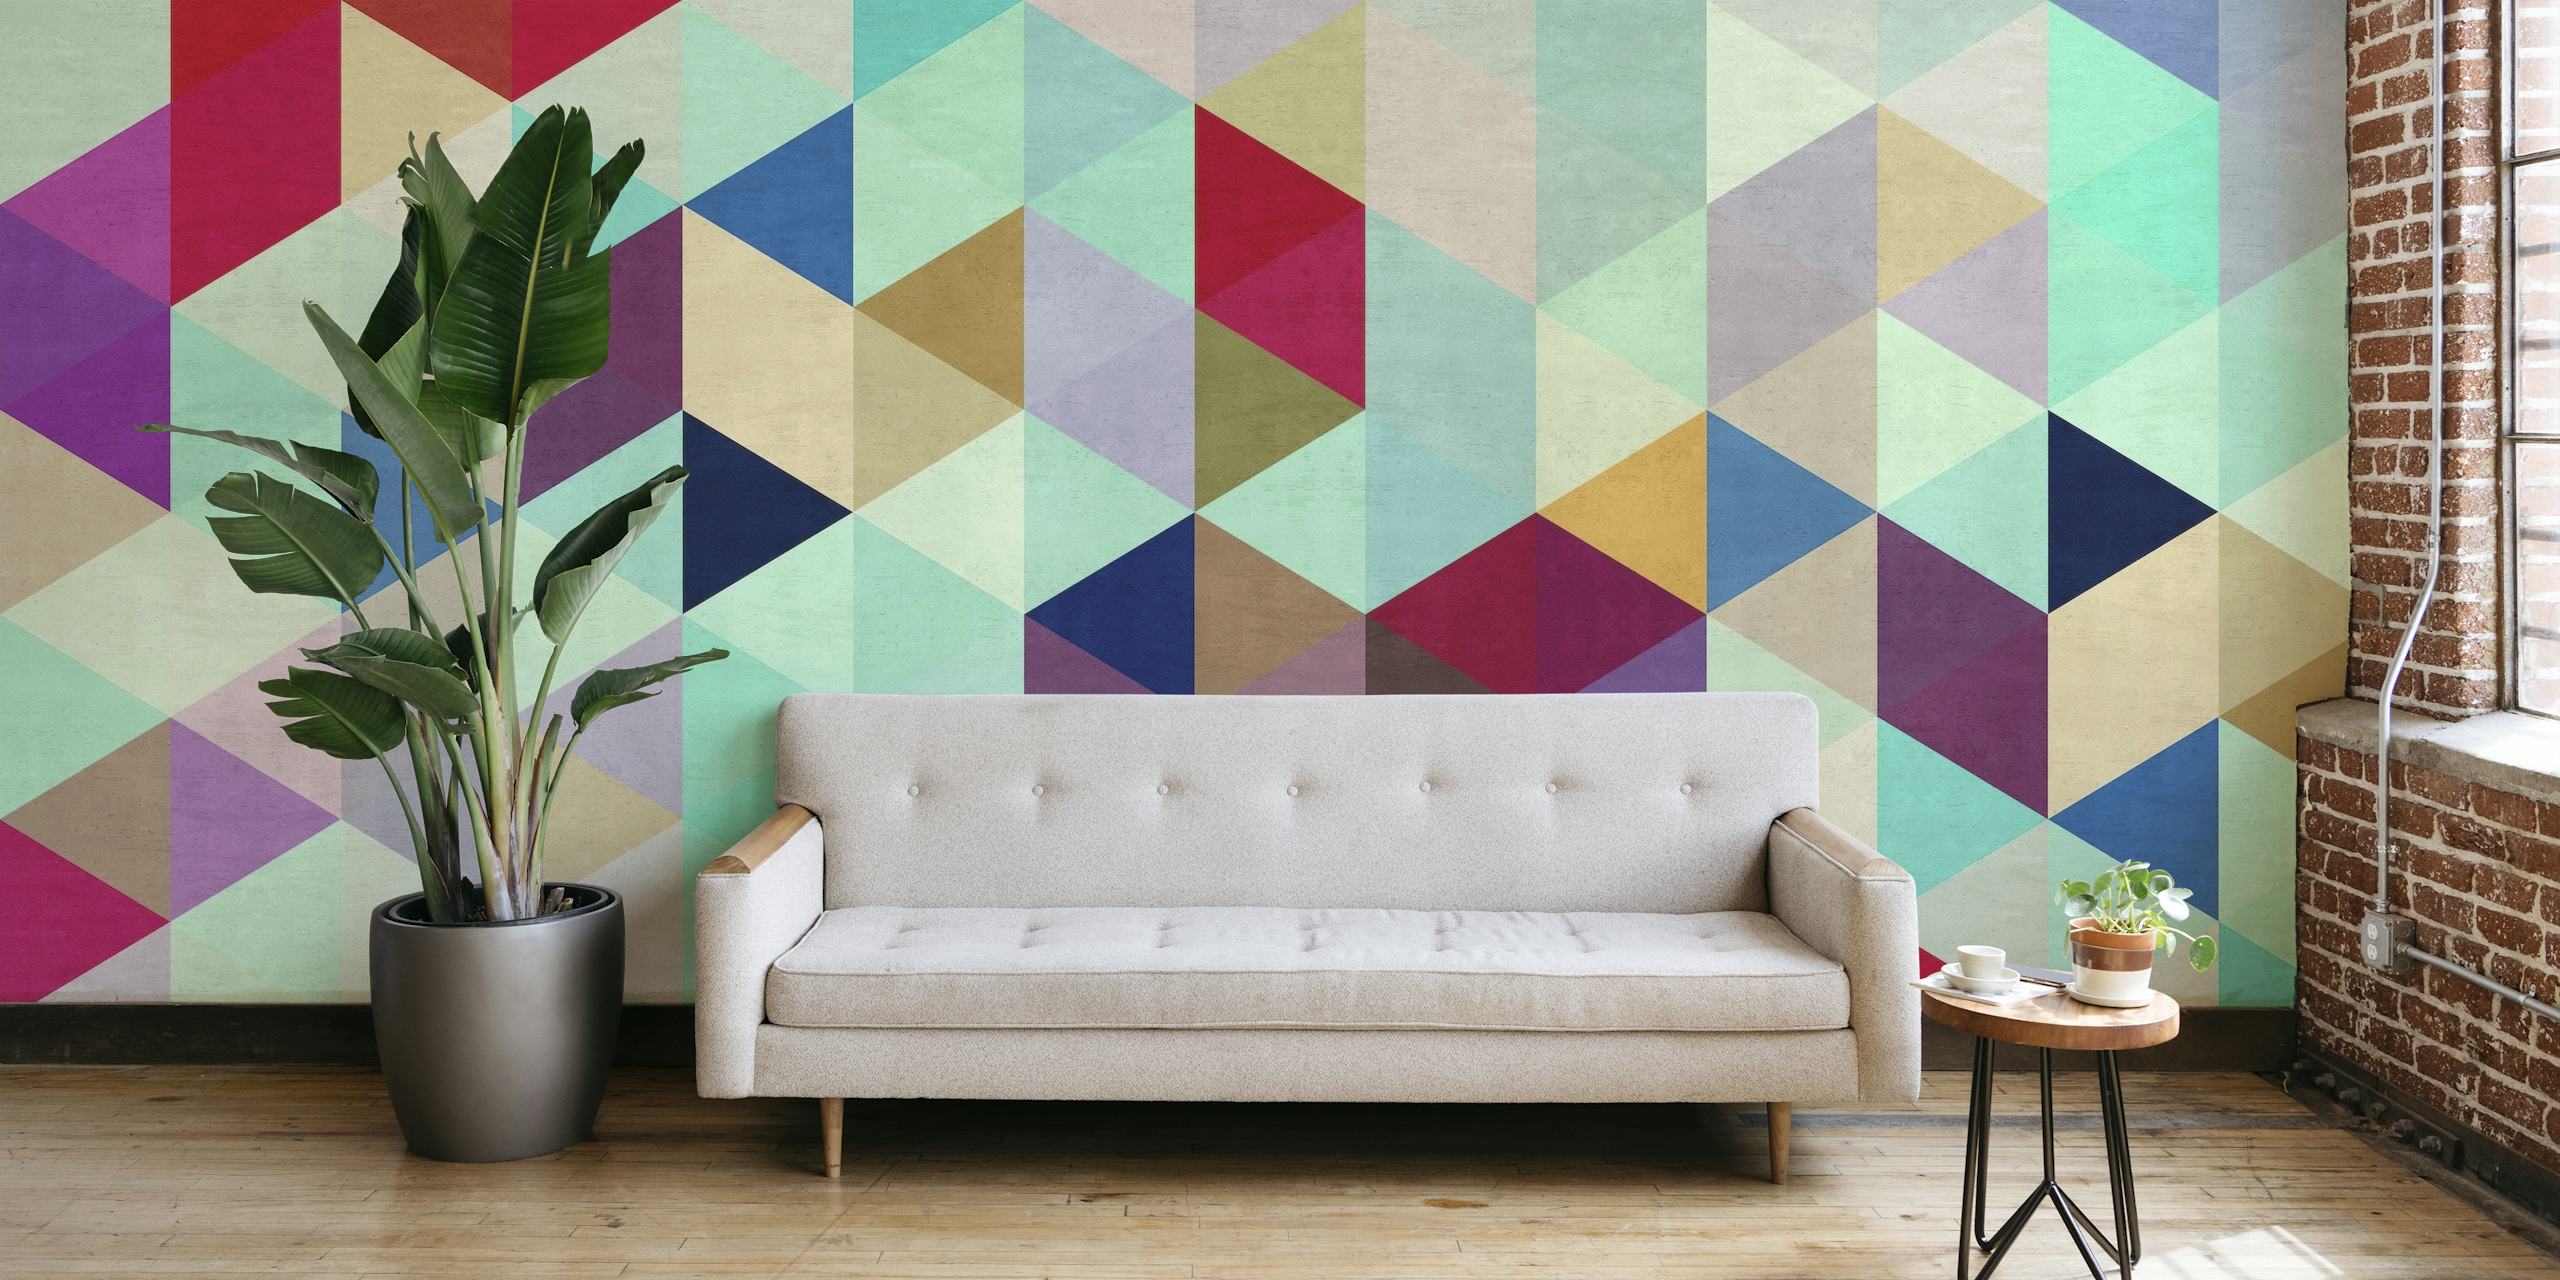 Vibrant wall mural of colored triangles in an interlocking pattern